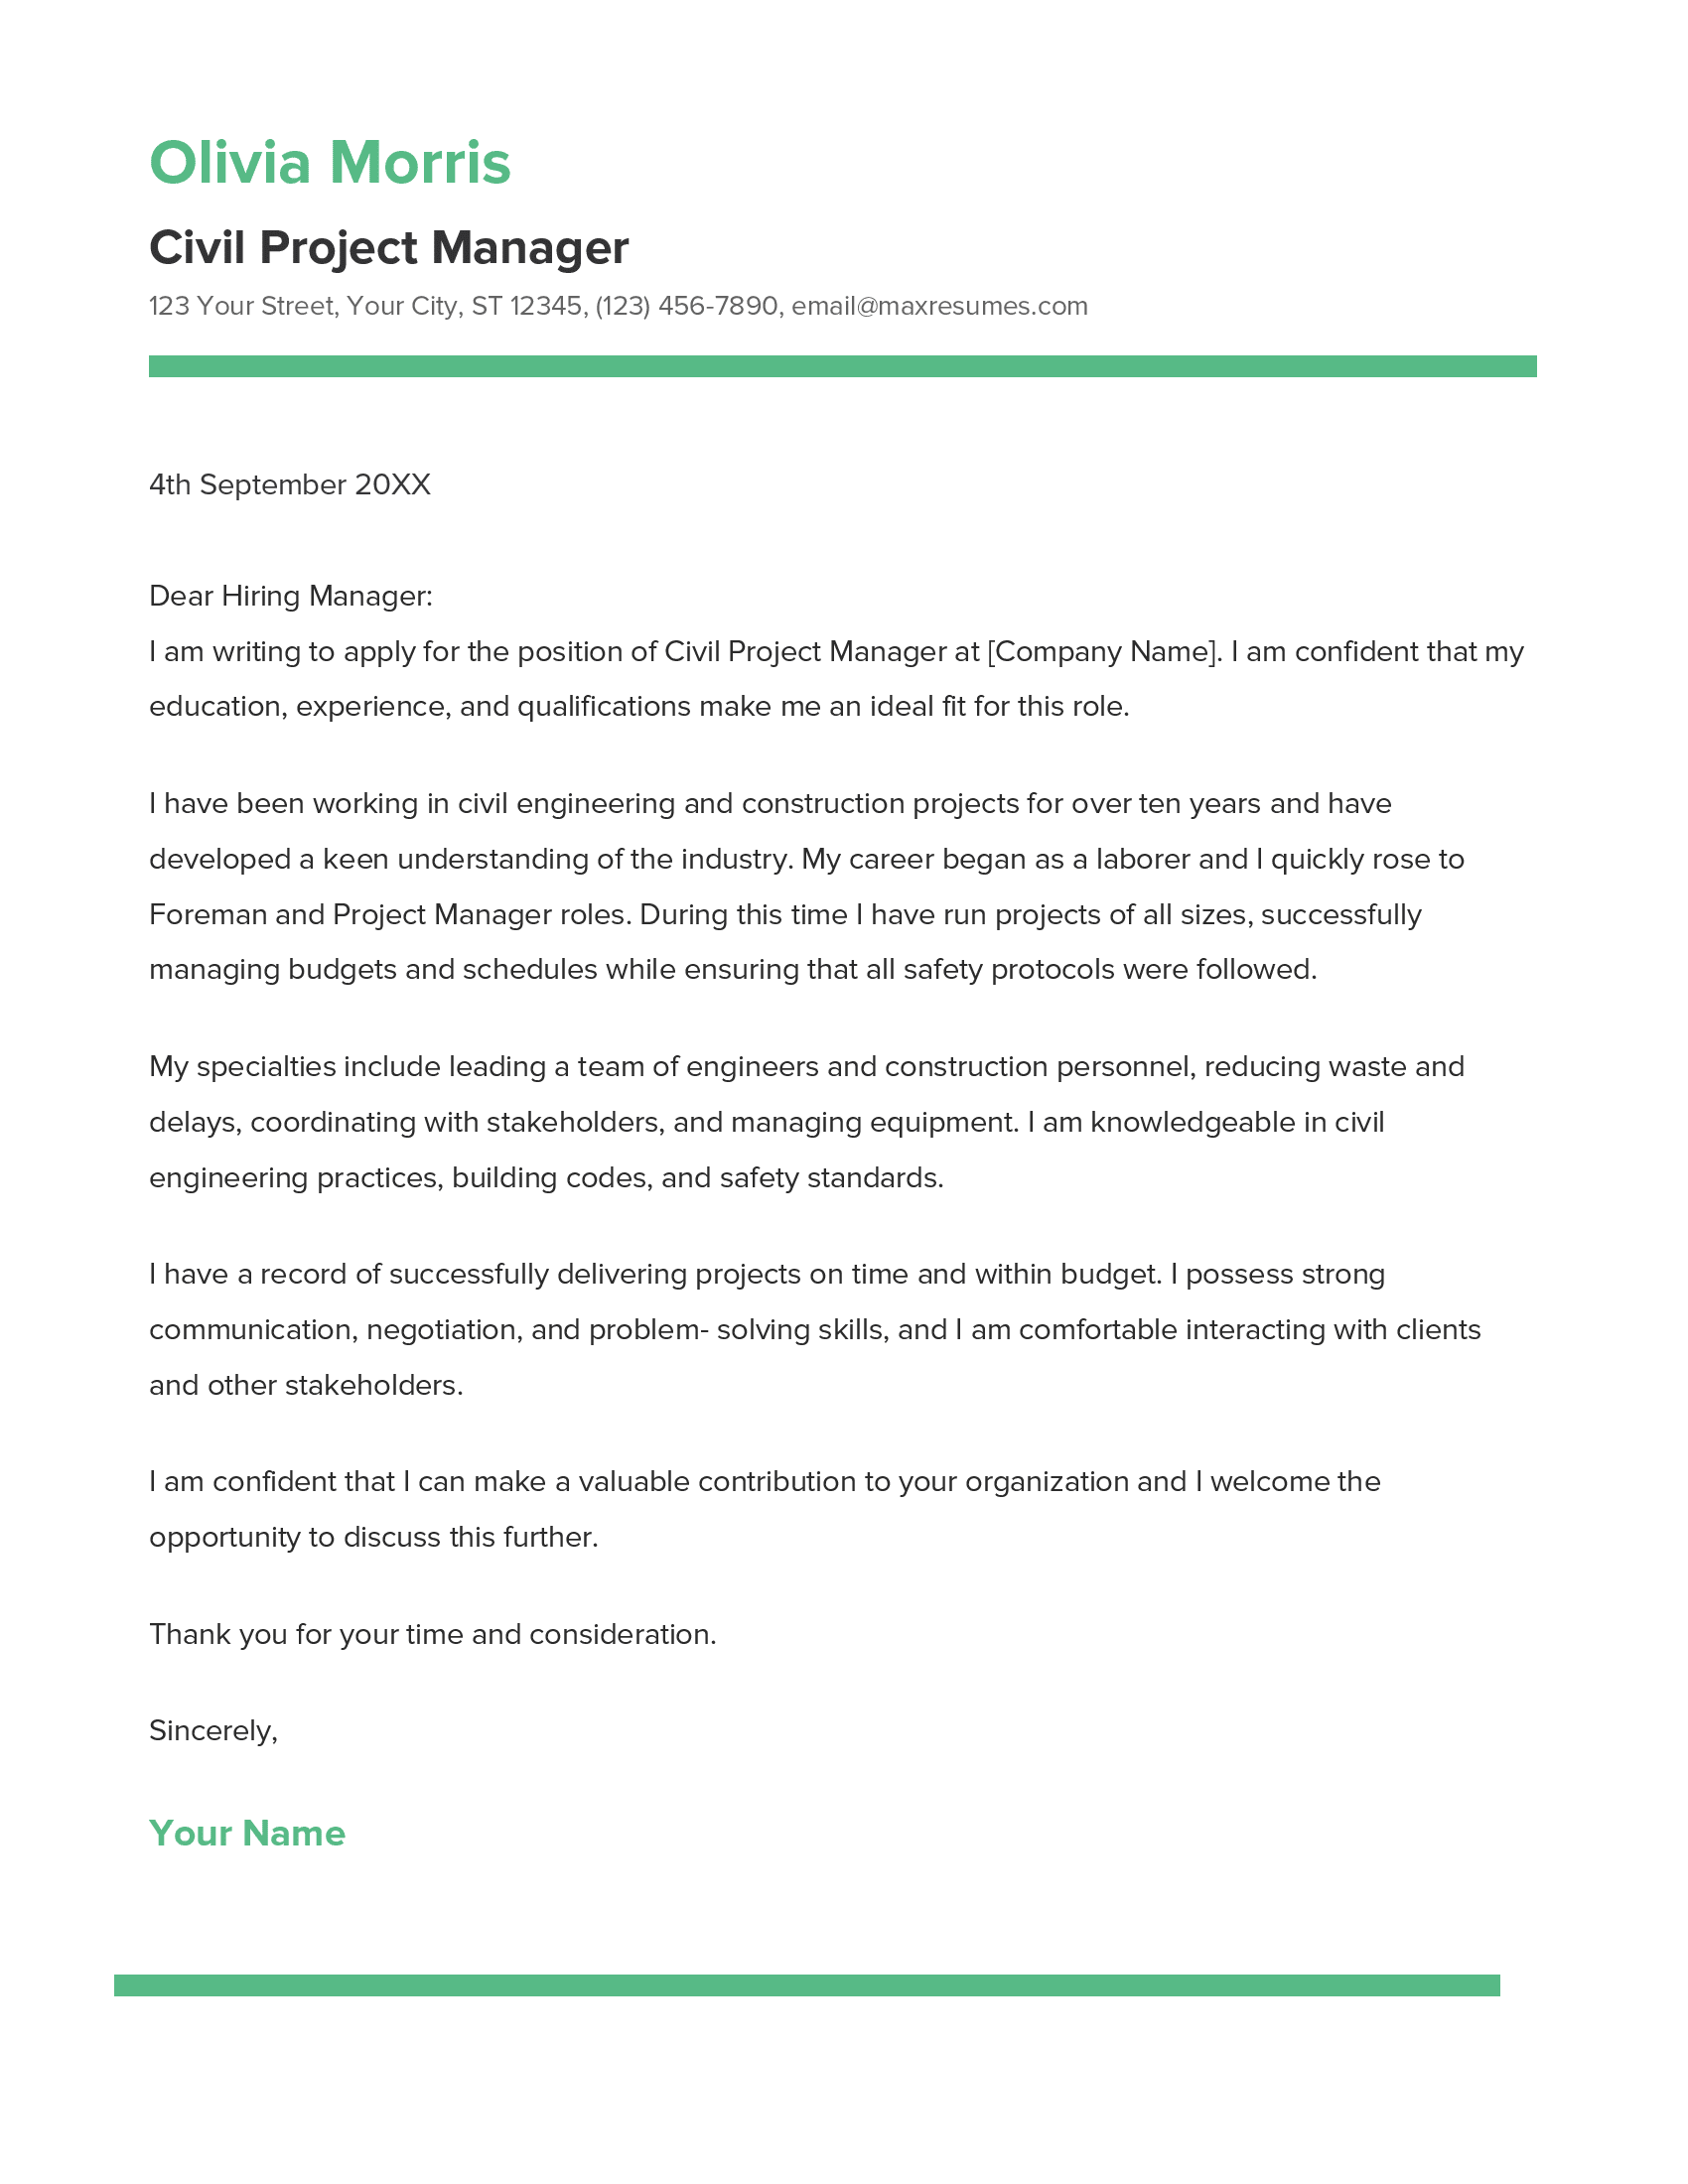 Civil Project Manager Cover Letter Example